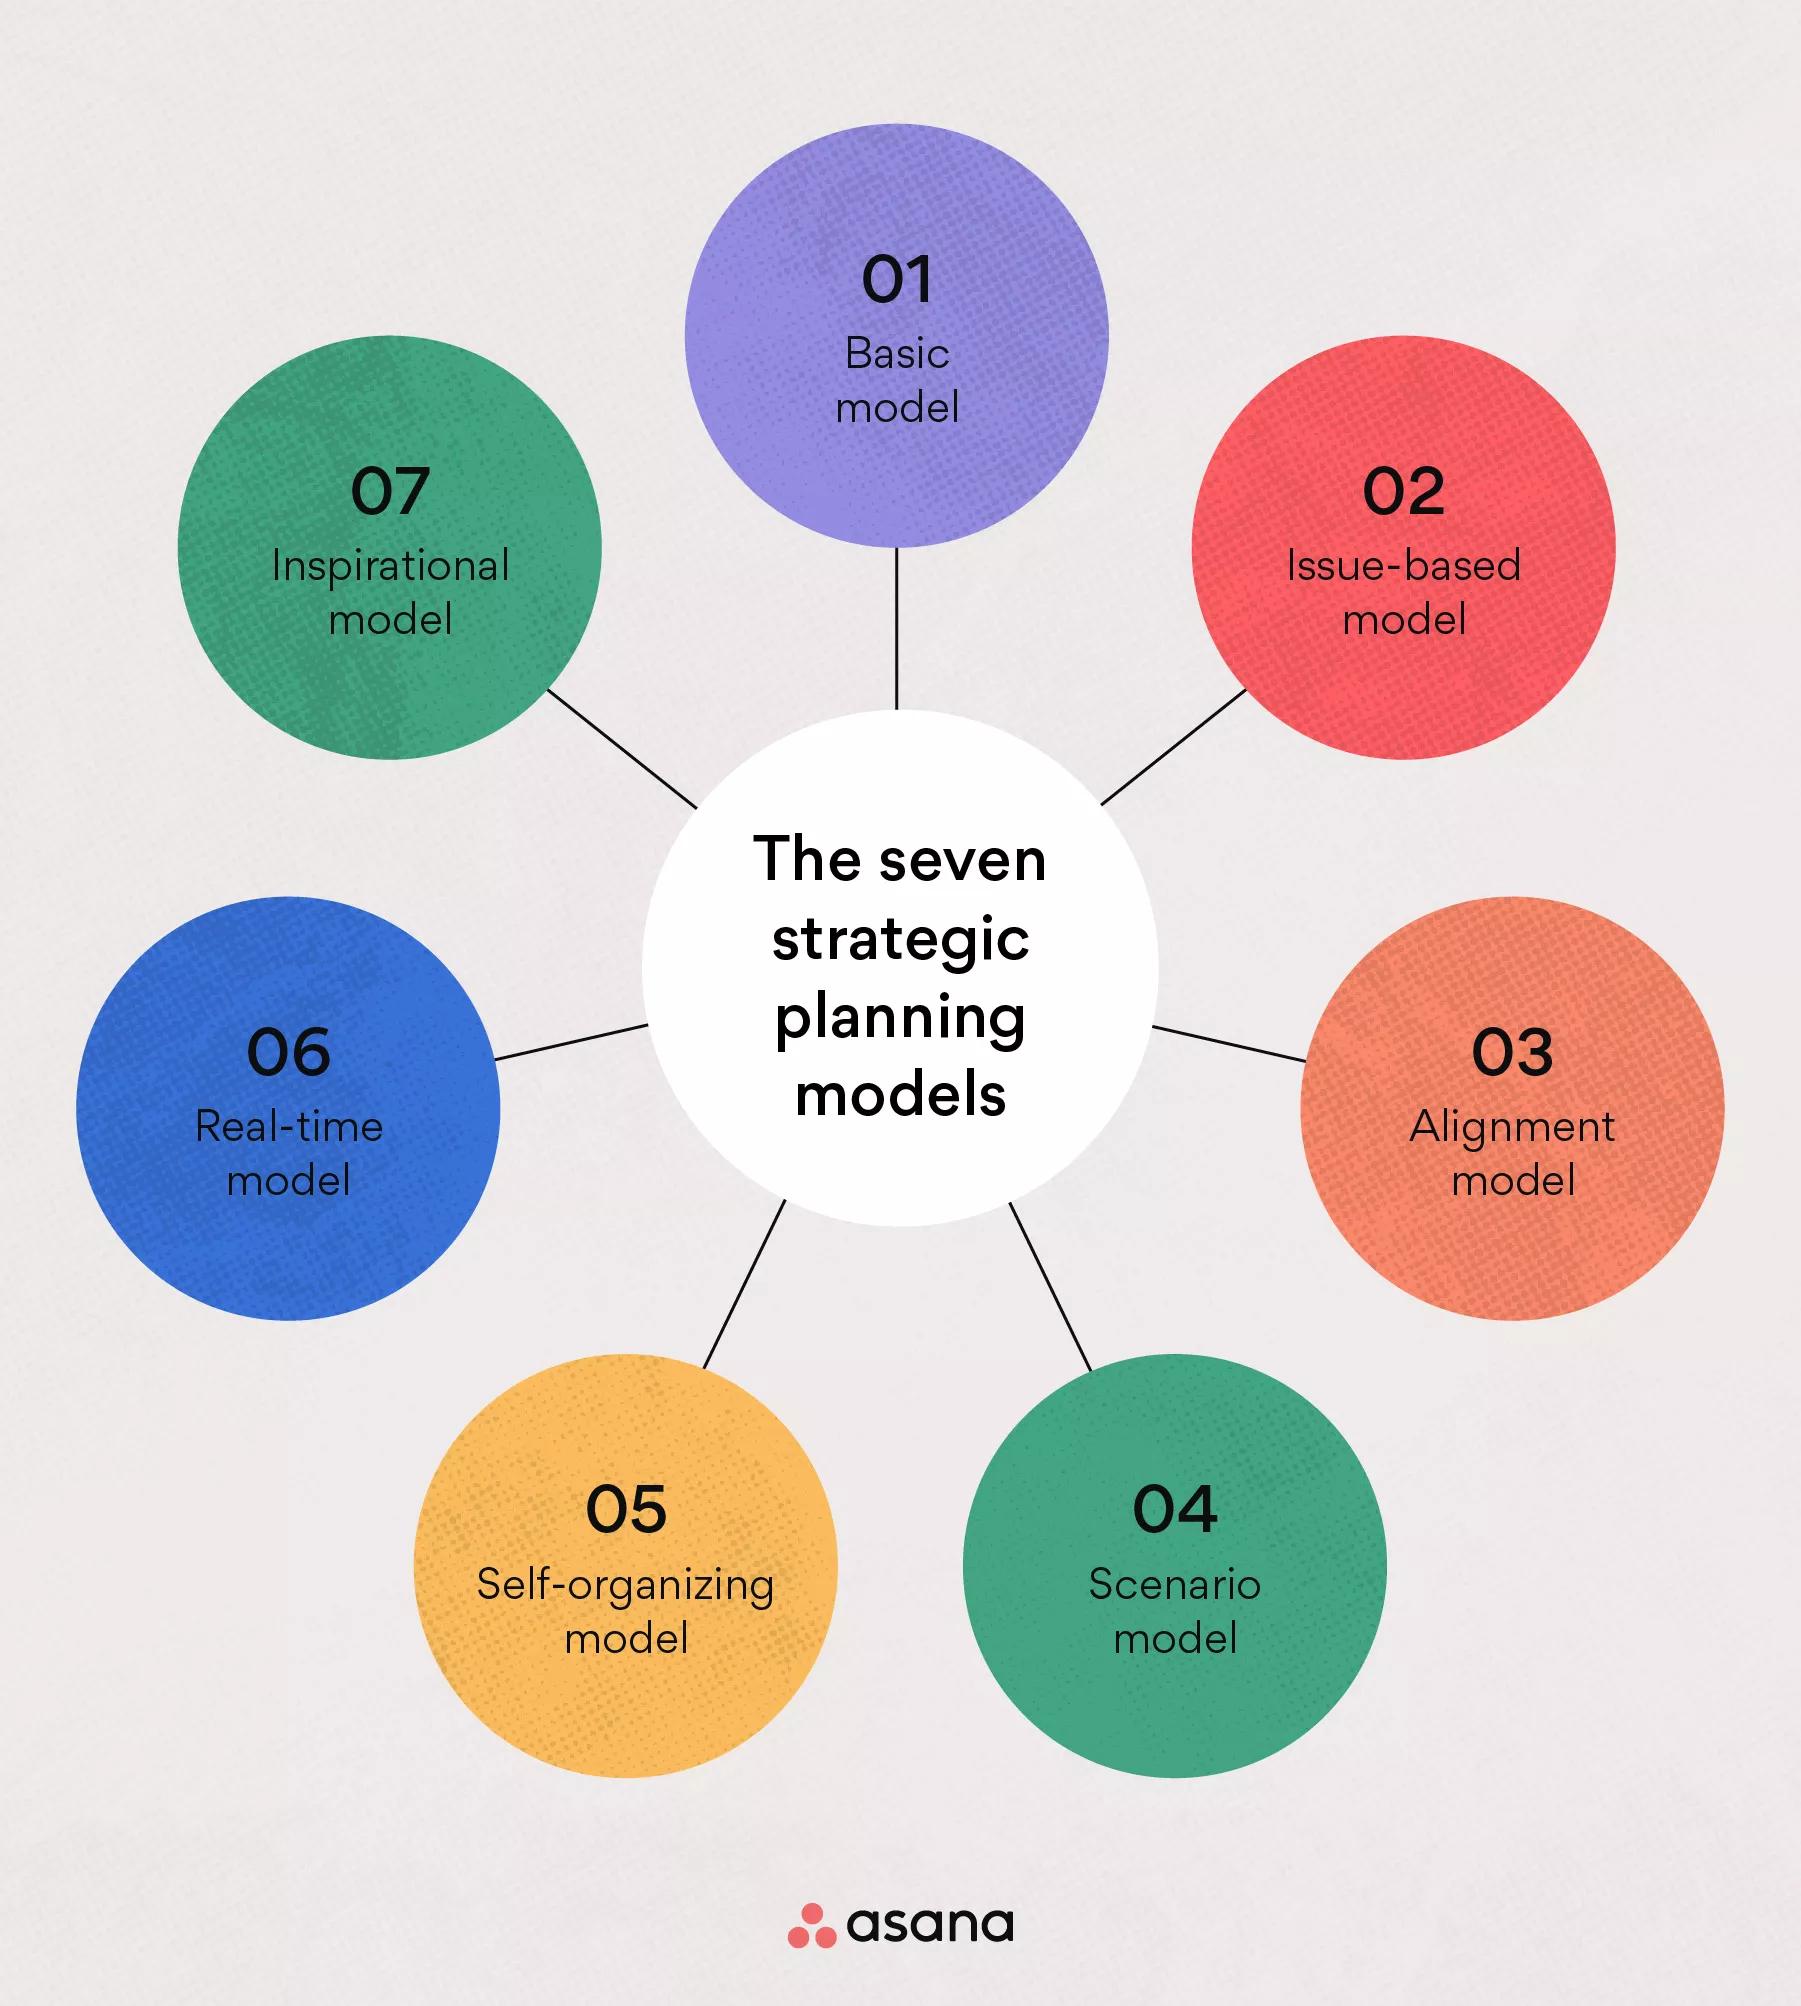 What is the basic strategy model?